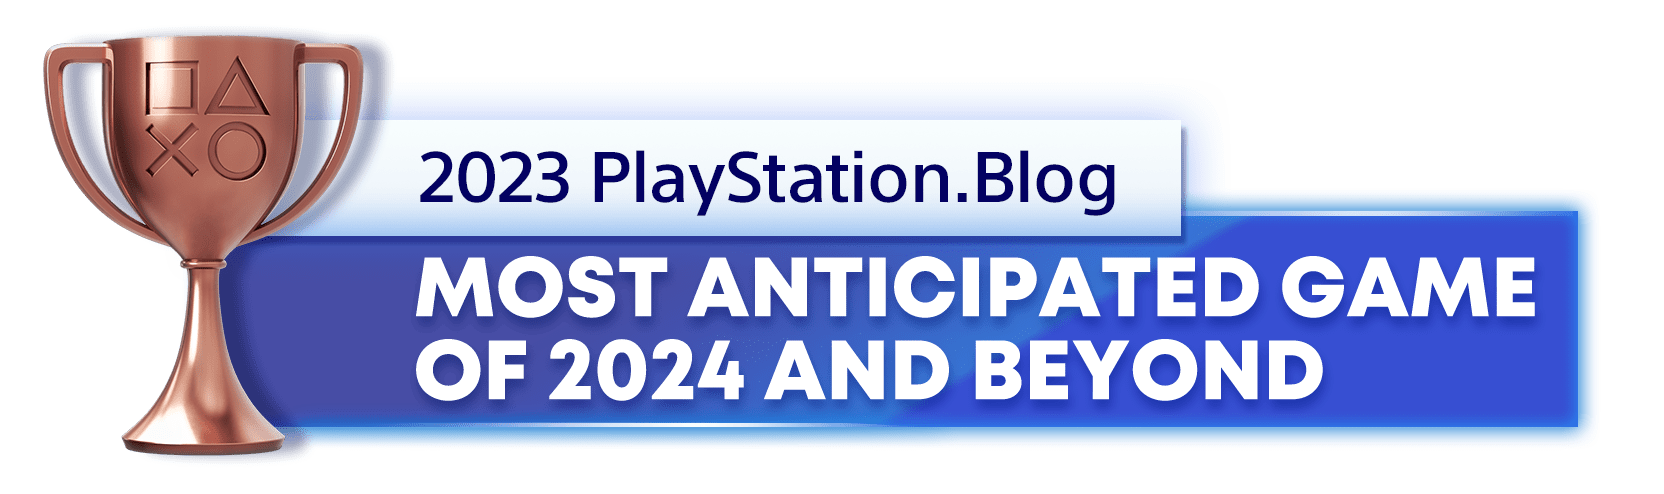  Bronze Trophy for the 2023 PlayStation Blog Most Anticipated PlayStation Game of 2024 and Beyond Winner